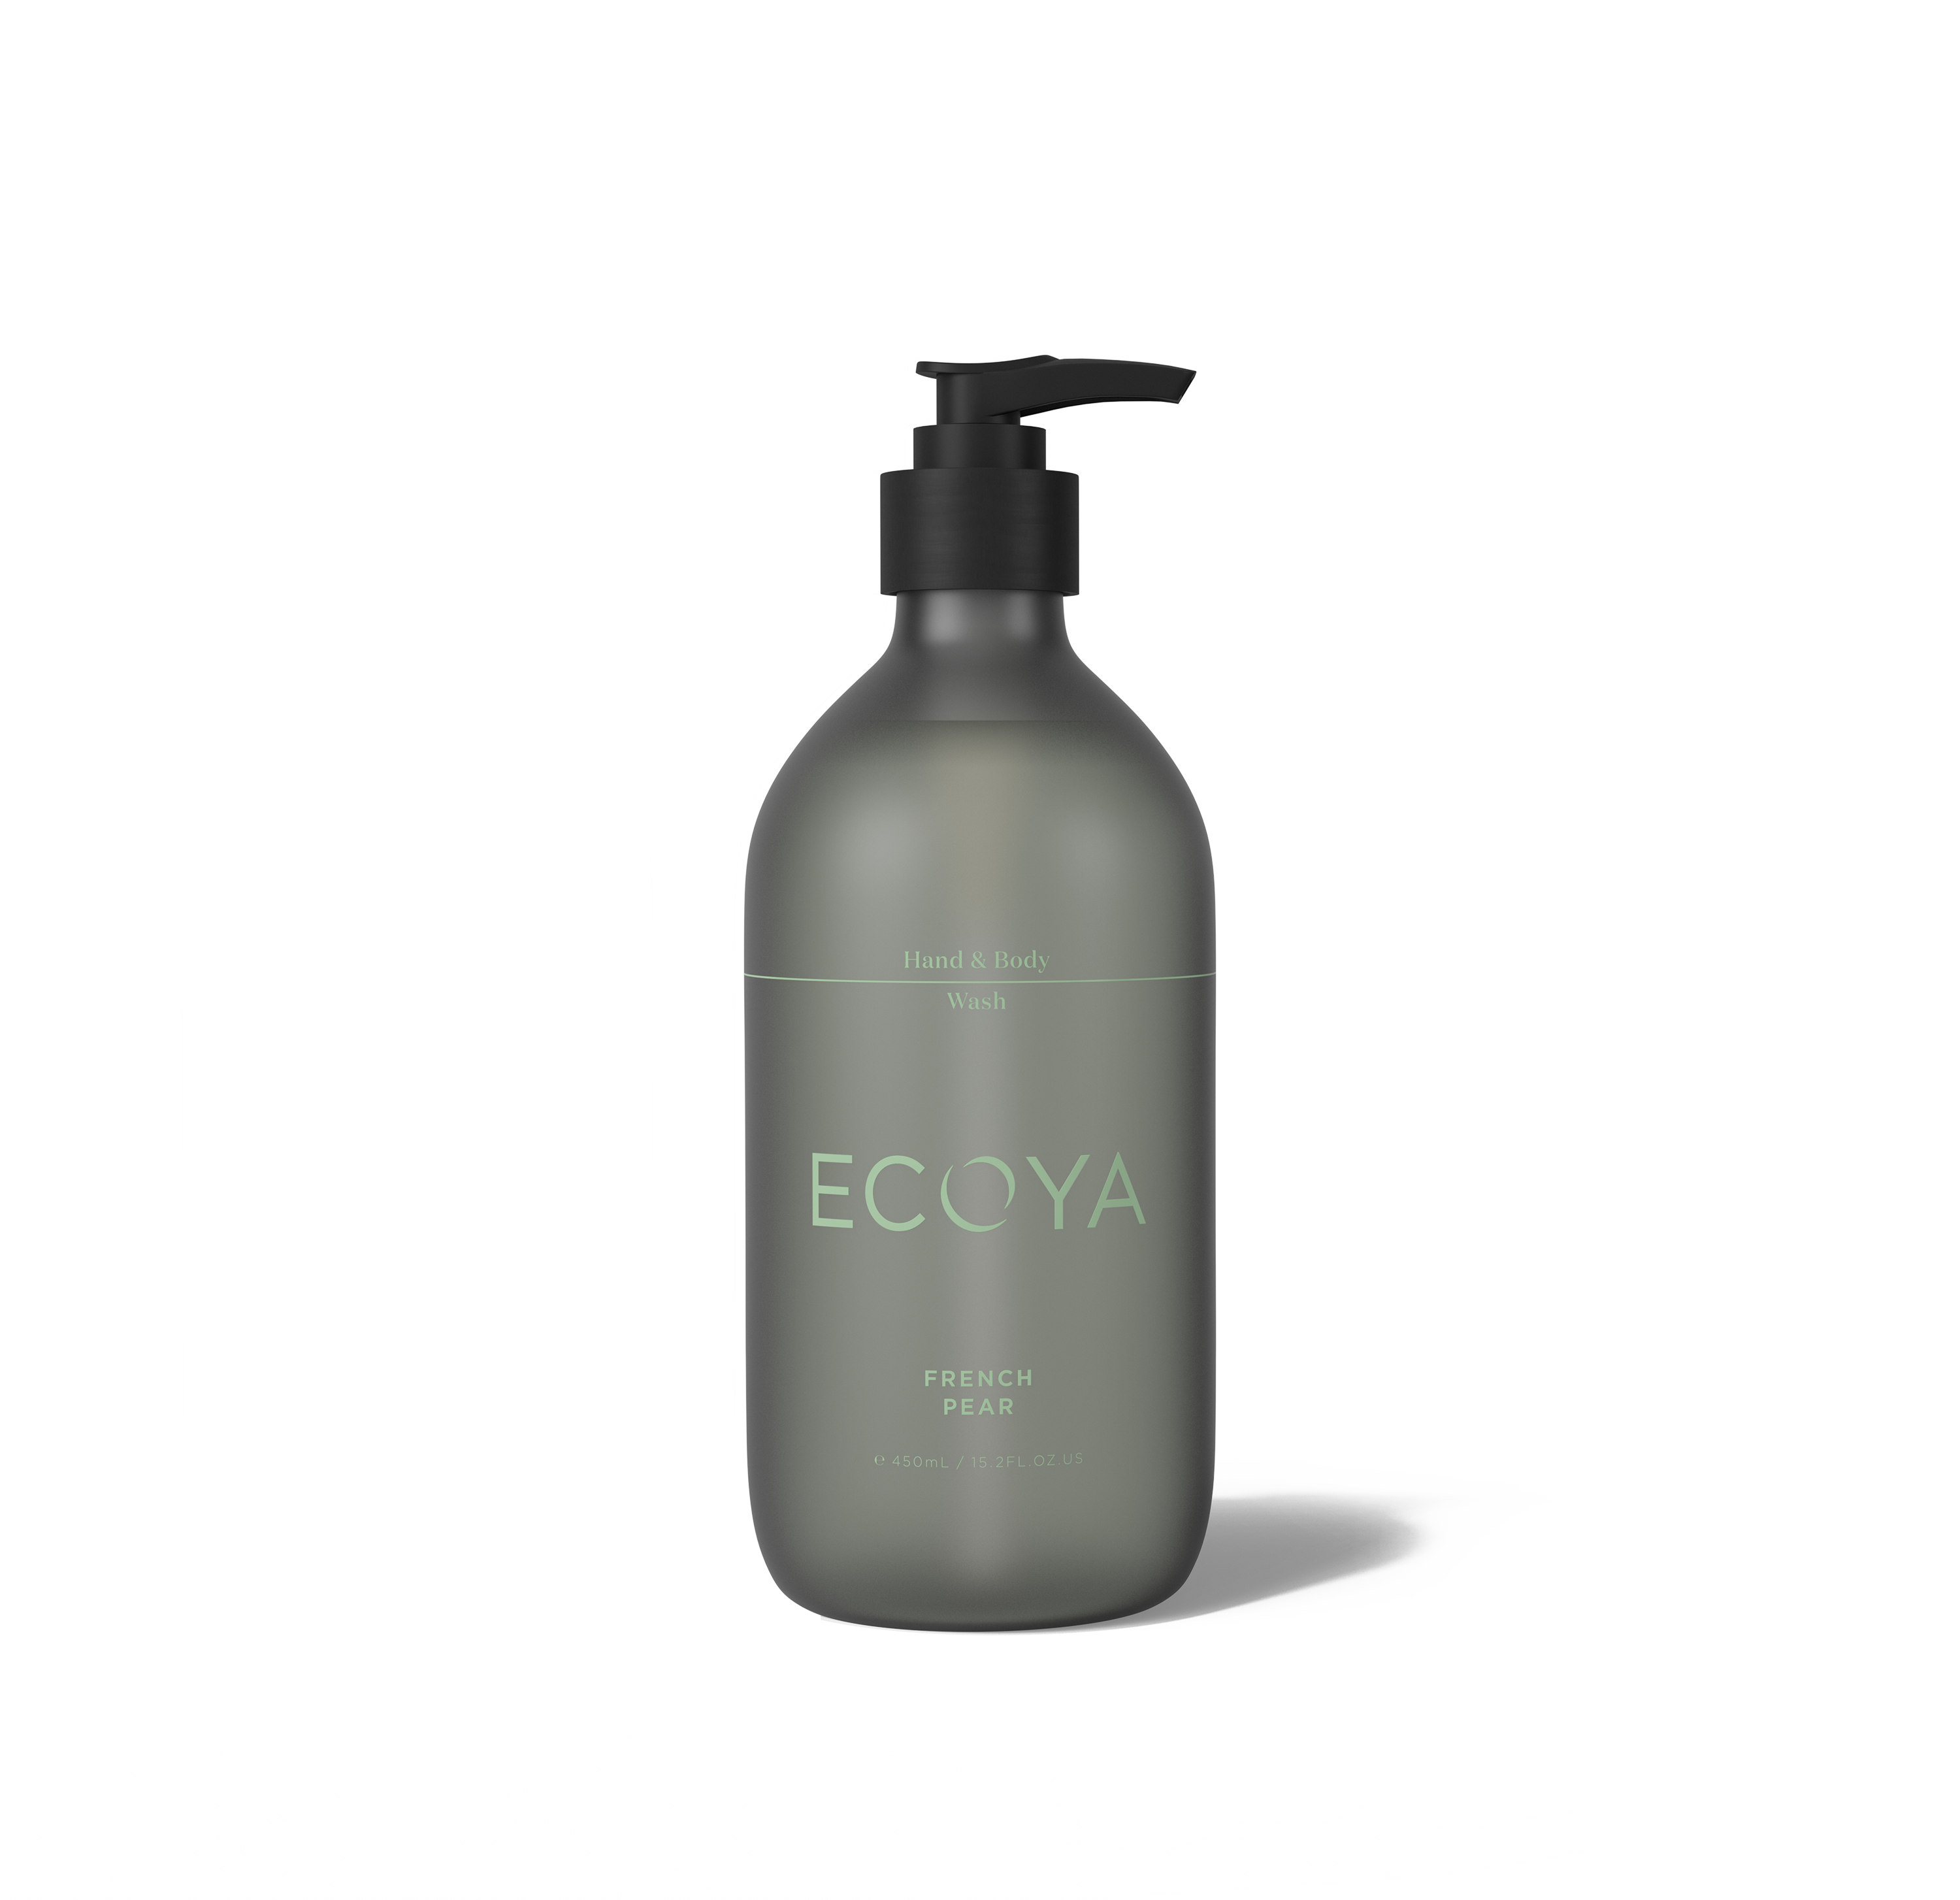 Ecoya French Pear Hand and Body Wash